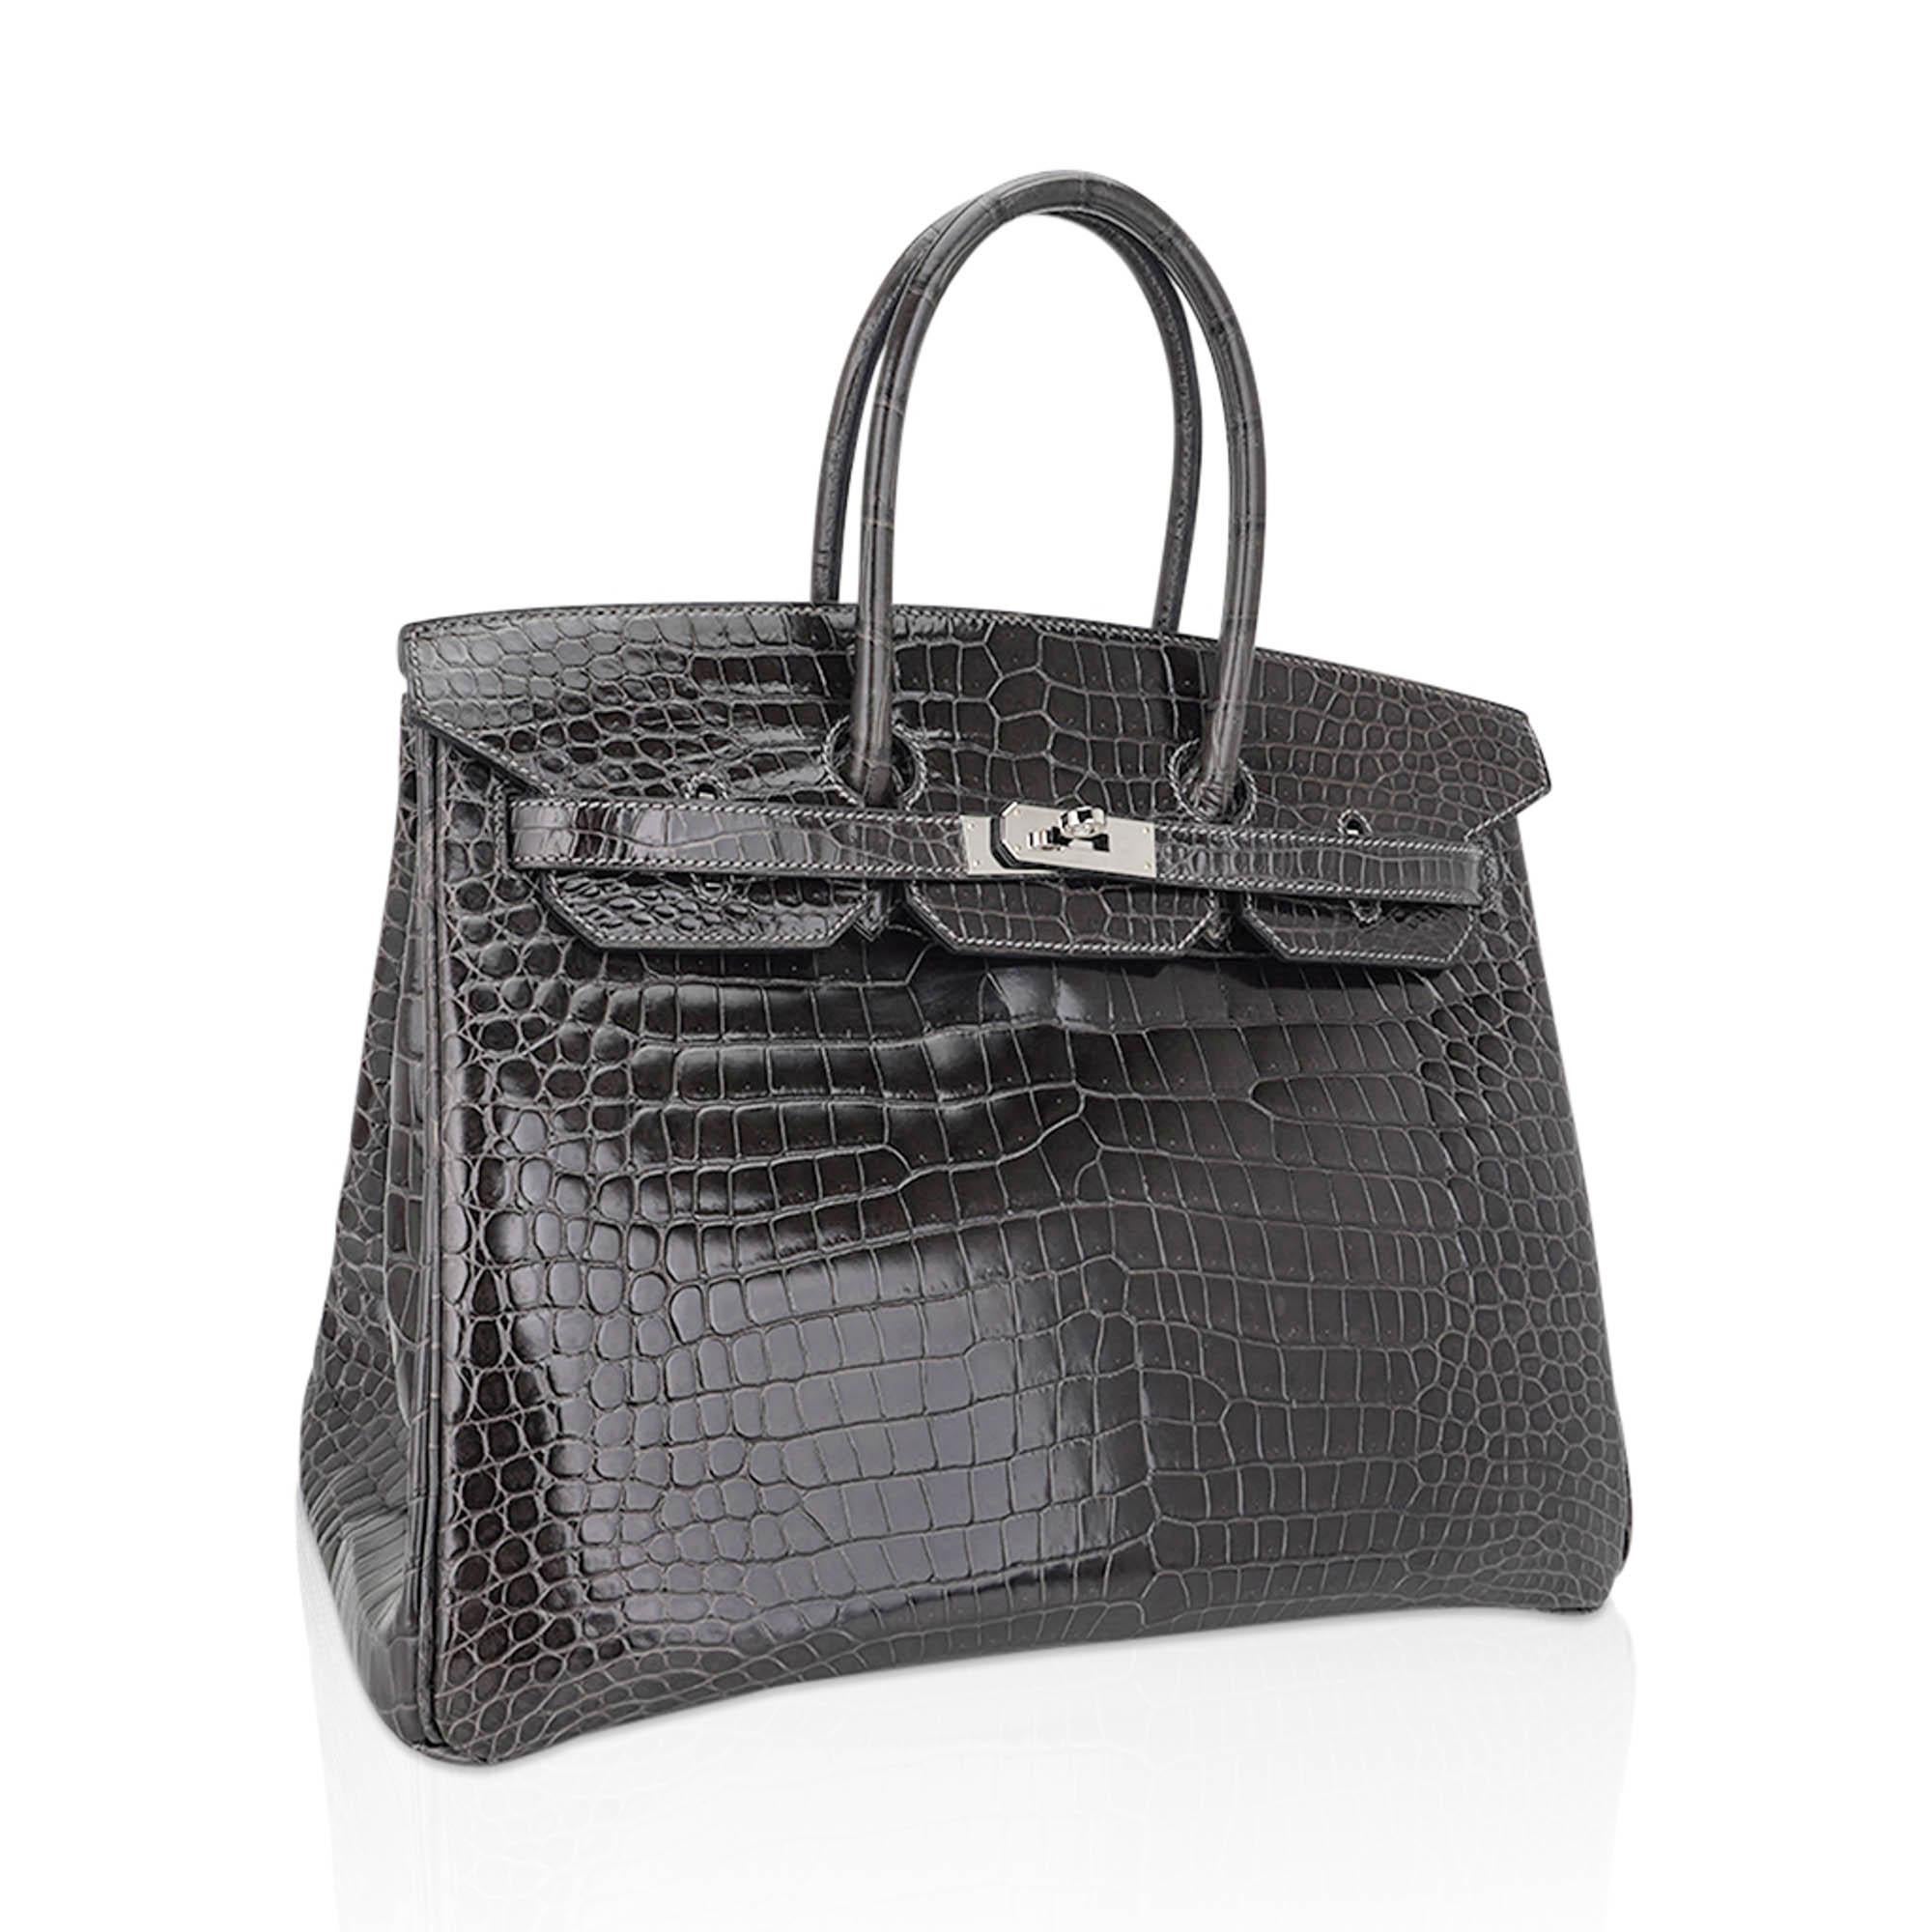 Mightychic offers an Hermes Birkin 35 Bag featured in Graphite porosus crocodile.
This rich neutral is the epitome of sophistication.
Stunning with palladium hardware.
This deep gray Hermes crocodile bag is a magnificent addition to any Hermes